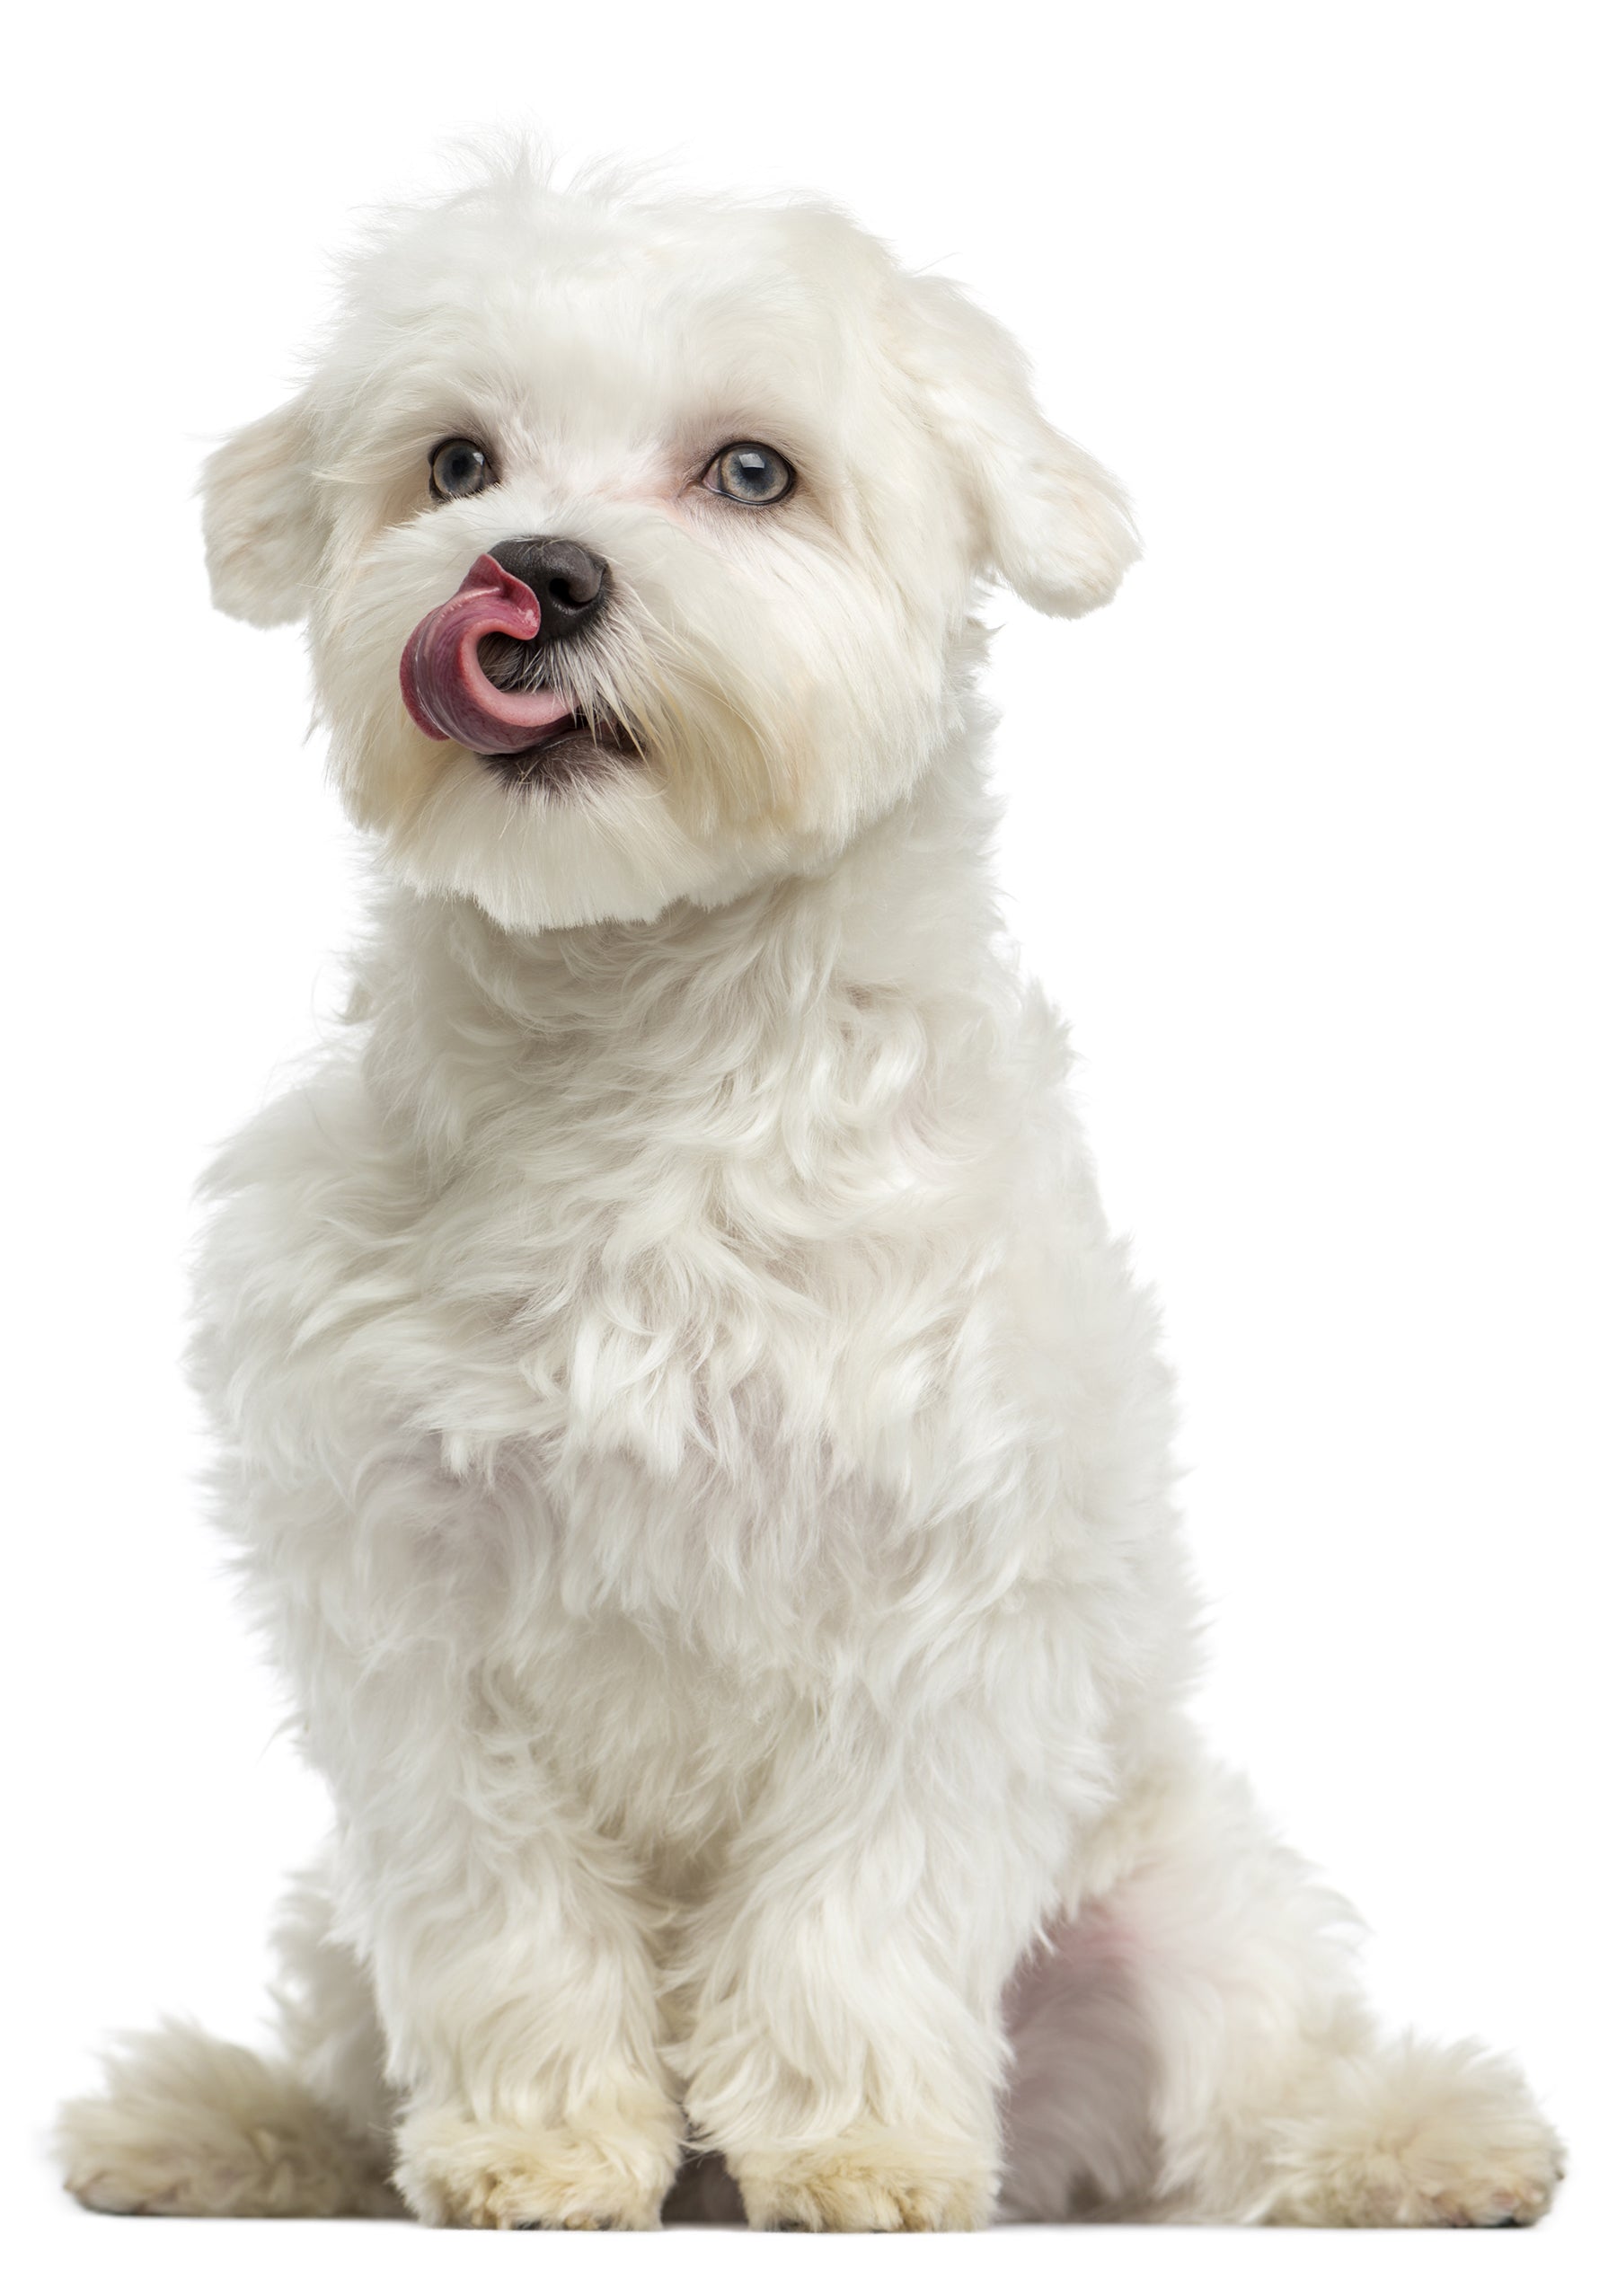 A small white dog licking its lips, looking at the camera.